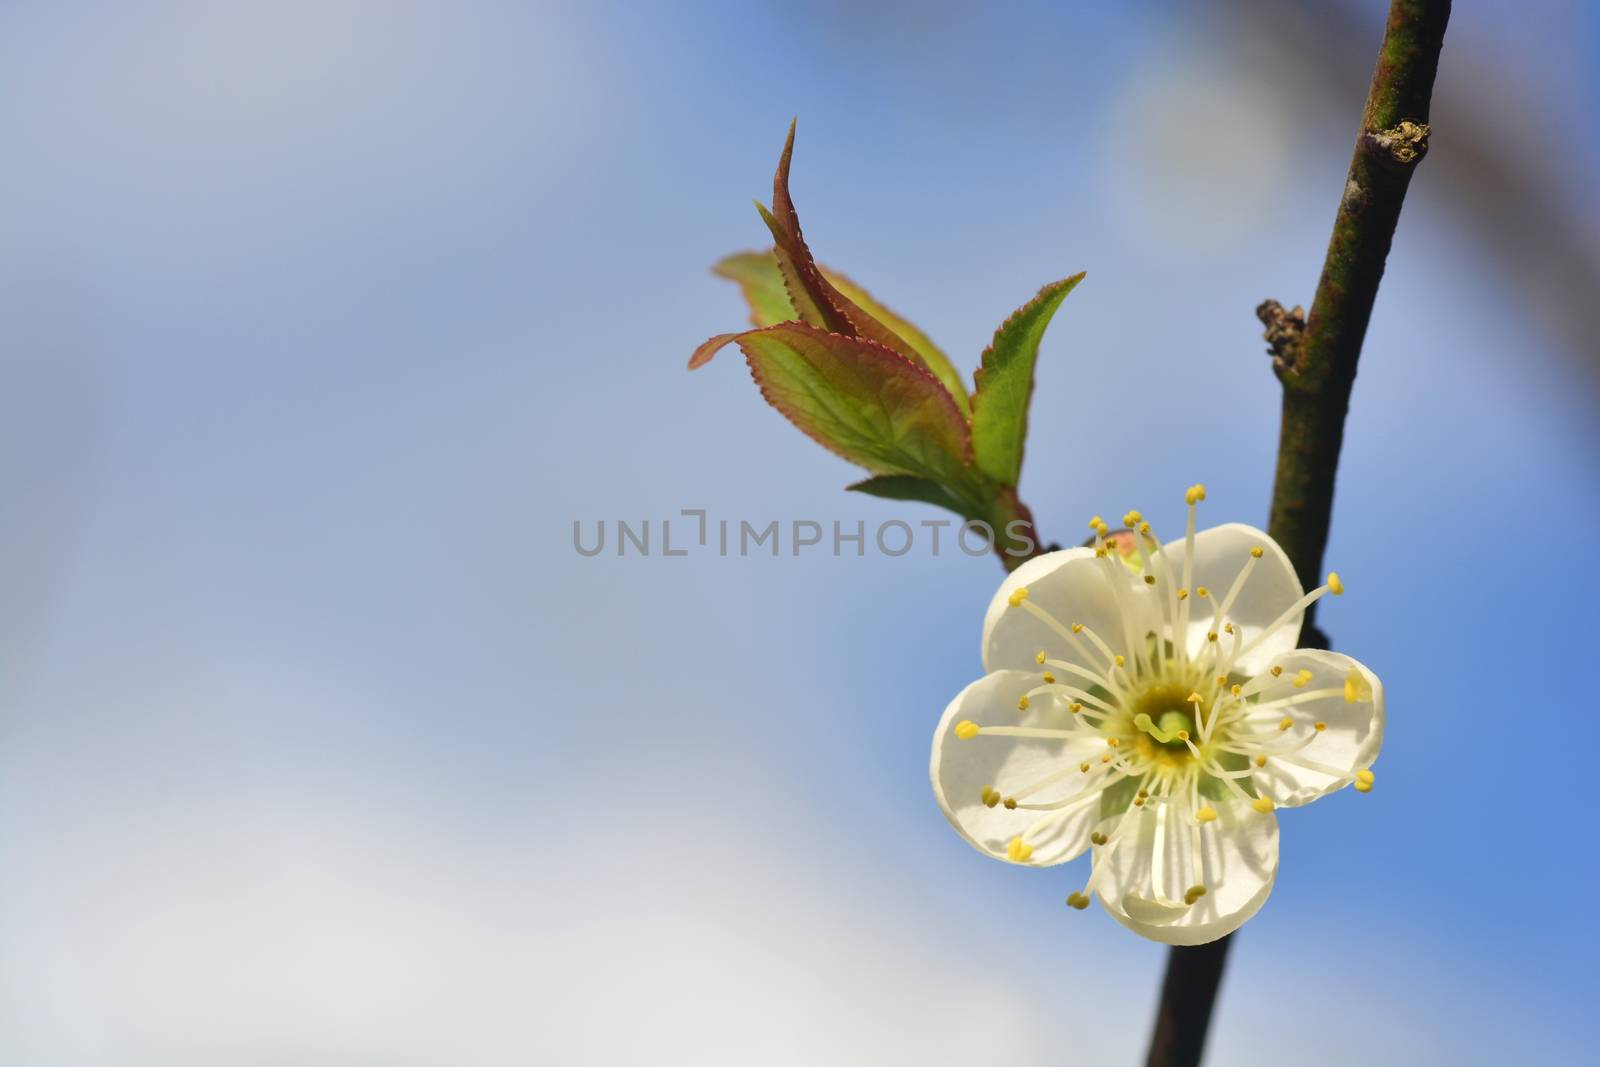 Blooming White Chinese plum flower or Japanese apricot, Korean green plum by ideation90